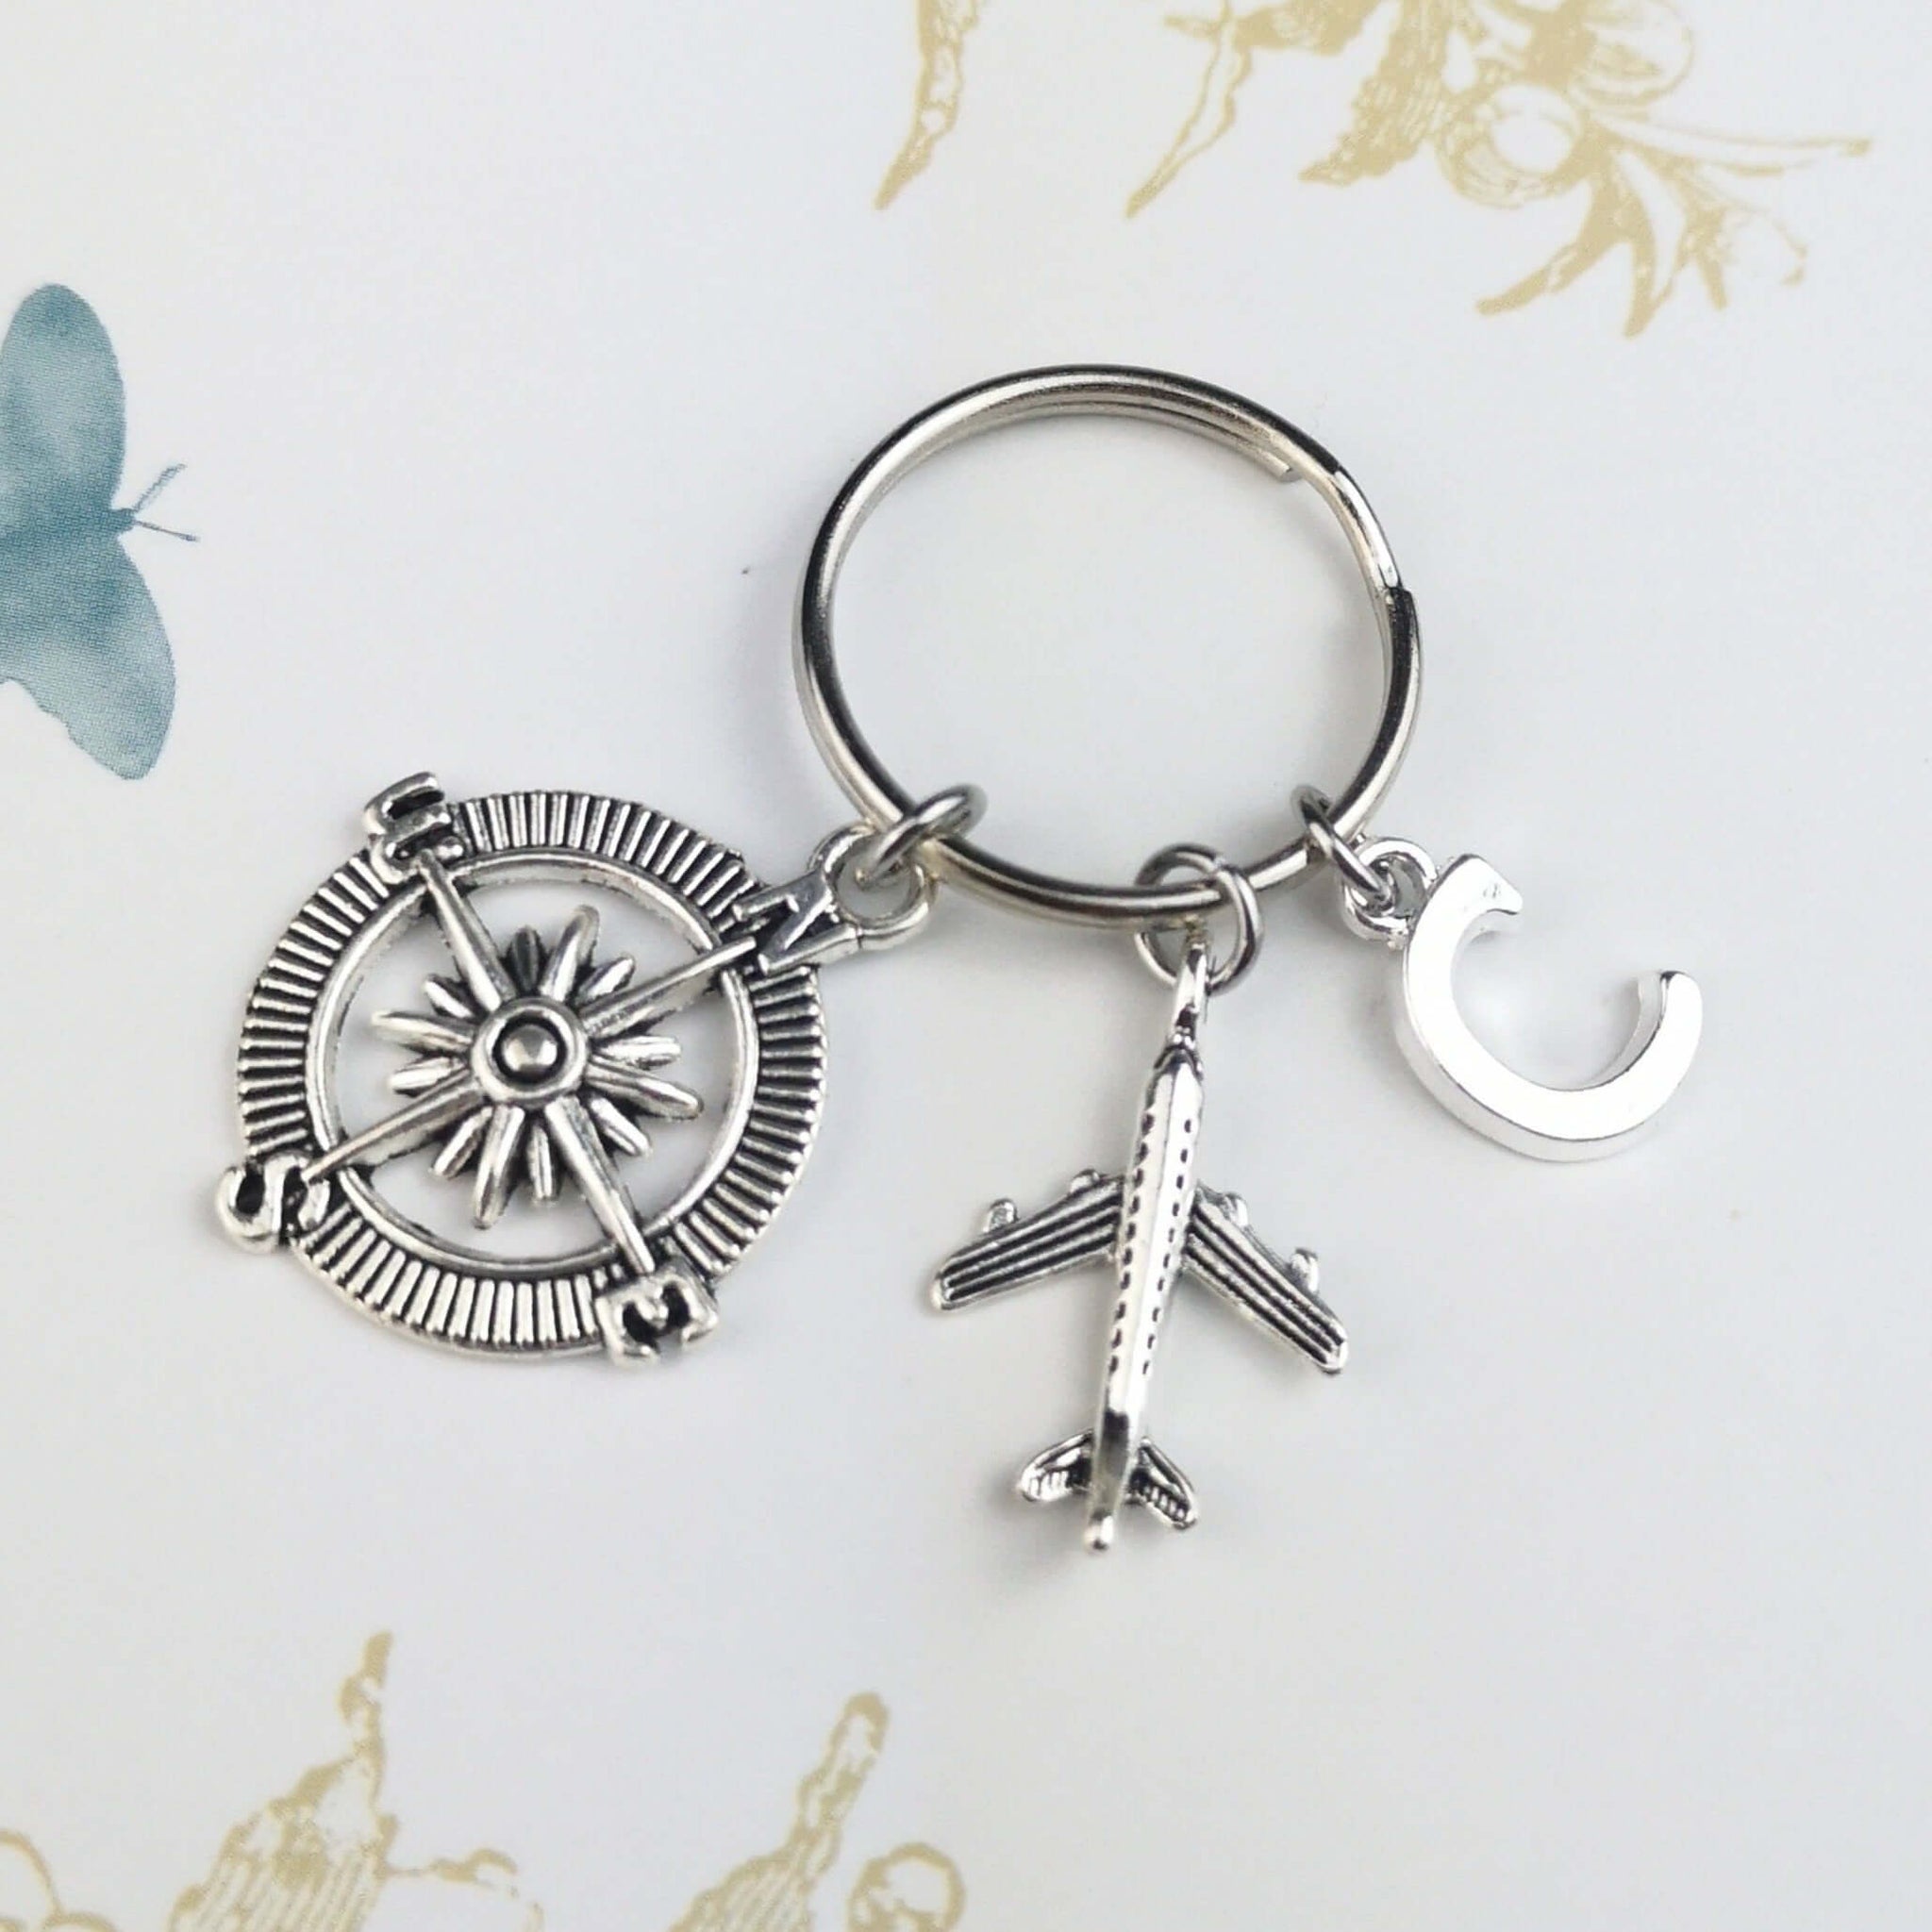 Compass keyring with initial